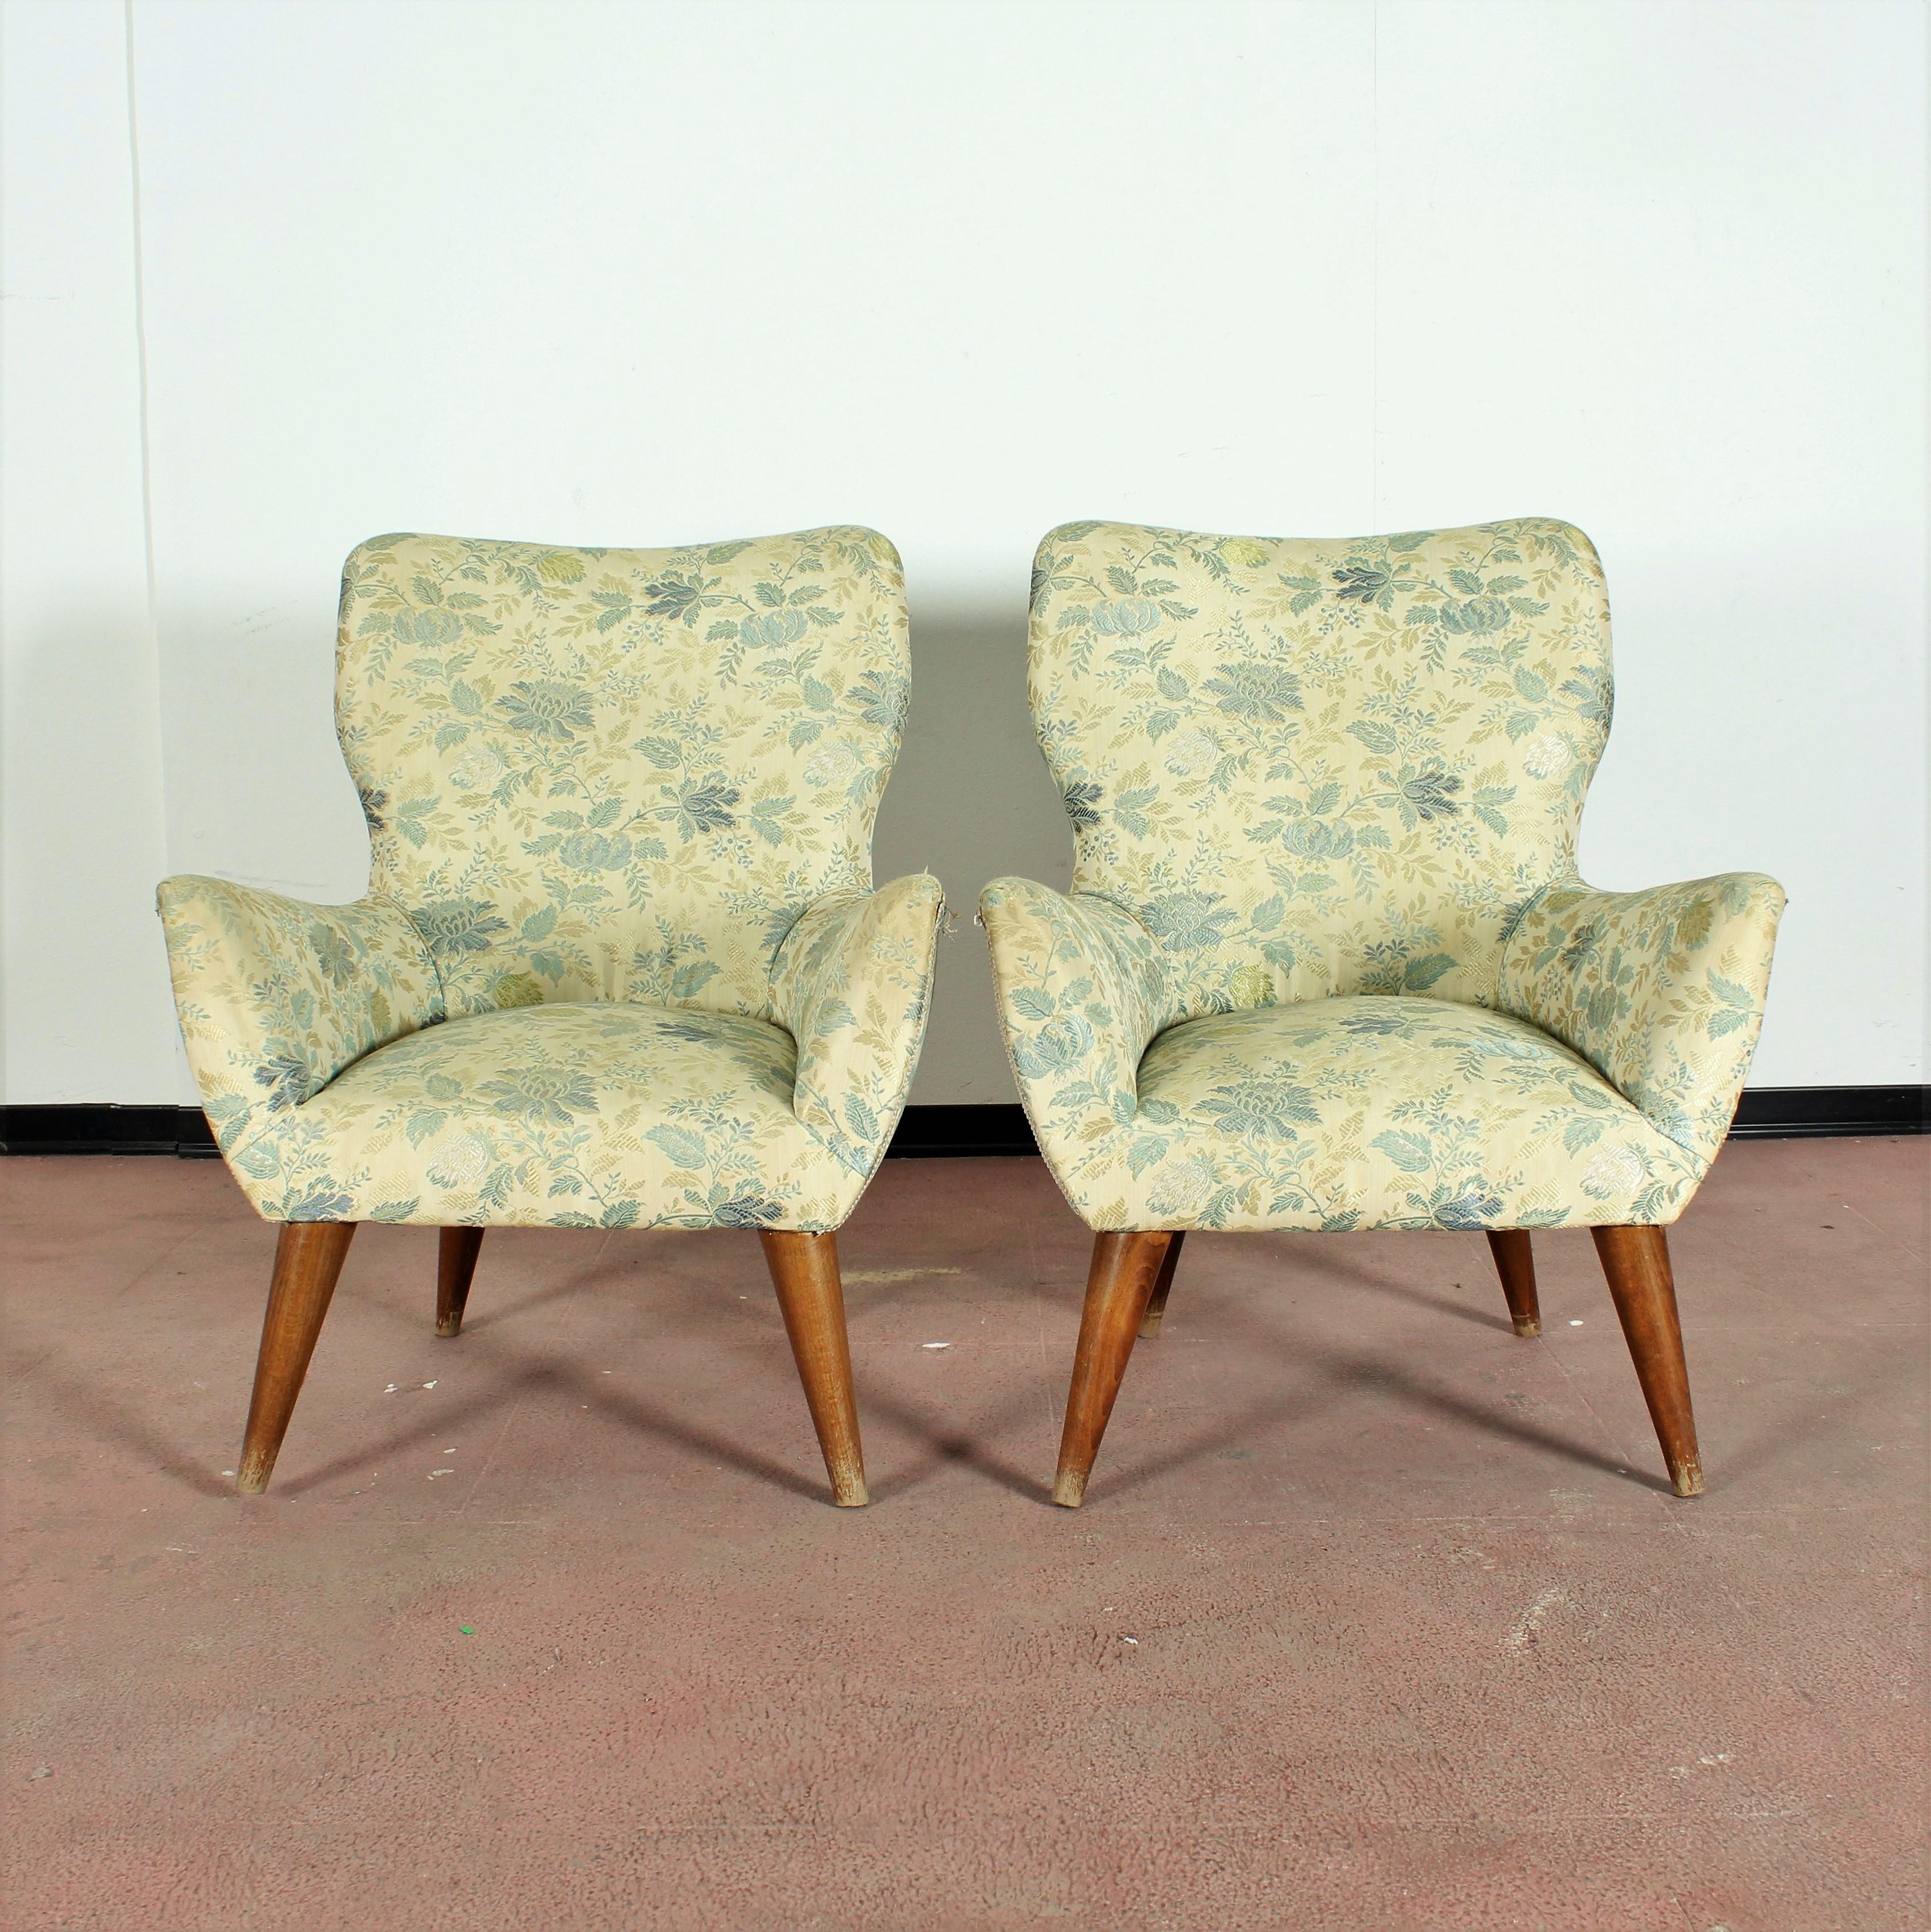 Excellent pair of armchairs Giulia Veronesi style. Its sensual curves and geometric legs give the chair a sculptural and modern and elegant feel.
Wear consistent with age and use.